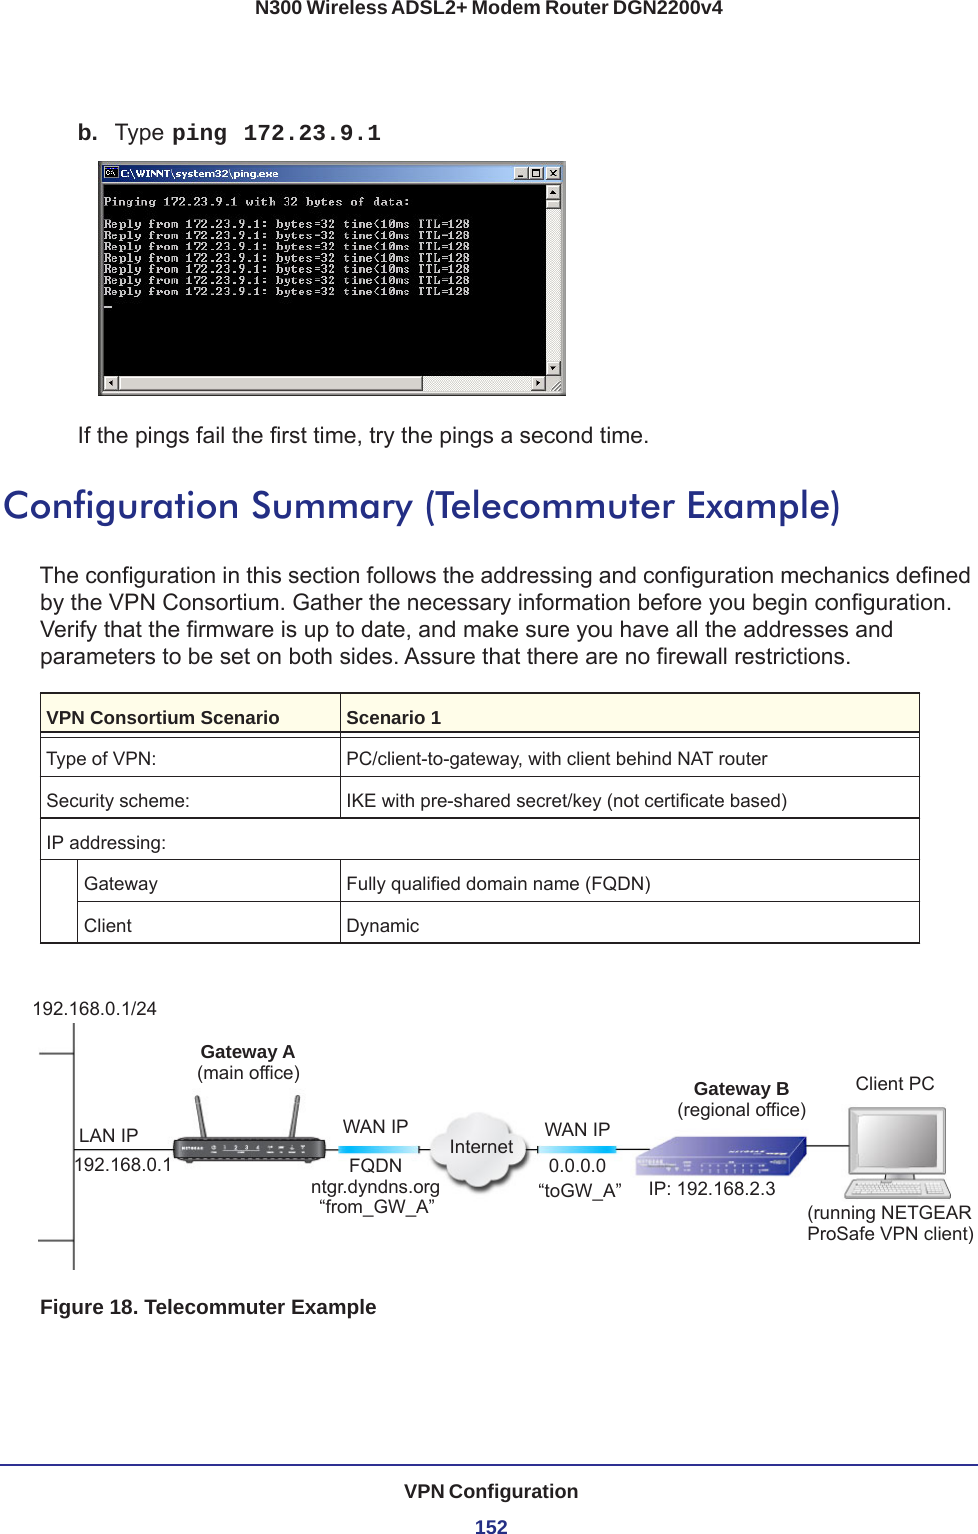 VPN Configuration152N300 Wireless ADSL2+ Modem Router DGN2200v4b.  Type ping 172.23.9.1If the pings fail the first time, try the pings a second time.Configuration Summary (Telecommuter Example)The configuration in this section follows the addressing and configuration mechanics defined by the VPN Consortium. Gather the necessary information before you begin configuration. Verify that the firmware is up to date, and make sure you have all the addresses and parameters to be set on both sides. Assure that there are no firewall restrictionsVPN Consortium Scenario Scenario 1Type of VPN: PC/client-to-gateway, with client behind NAT routerSecurity scheme: IKE with pre-shared secret/key (not certificate based)IP addressing:Gateway  Fully qualified domain name (FQDN)Client  Dynamic.Gateway A(main office) Gateway BLAN IP192.168.0.1192.168.0.1/24FQDNntgr.dyndns.org“from_GW_A”WAN IP Internet WAN IP0.0.0.0“toGW_A” IP: 192.168.2.3(regional office)Client PC(running NETGEARProSafe VPN client)Figure 18. Telecommuter Example